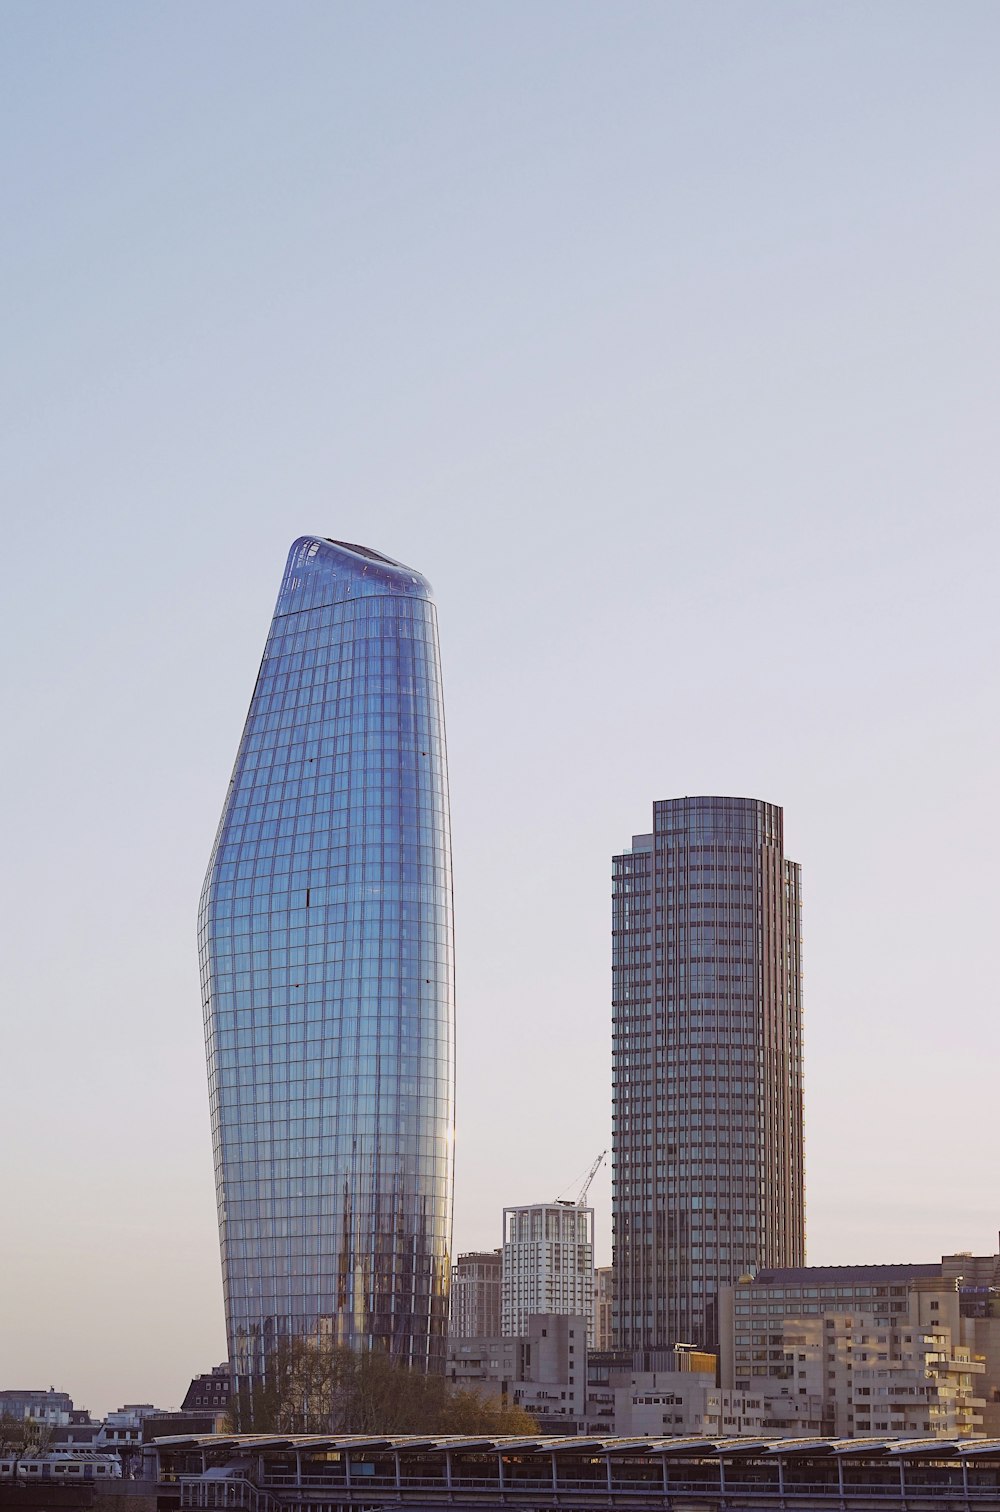 high-rise glass building